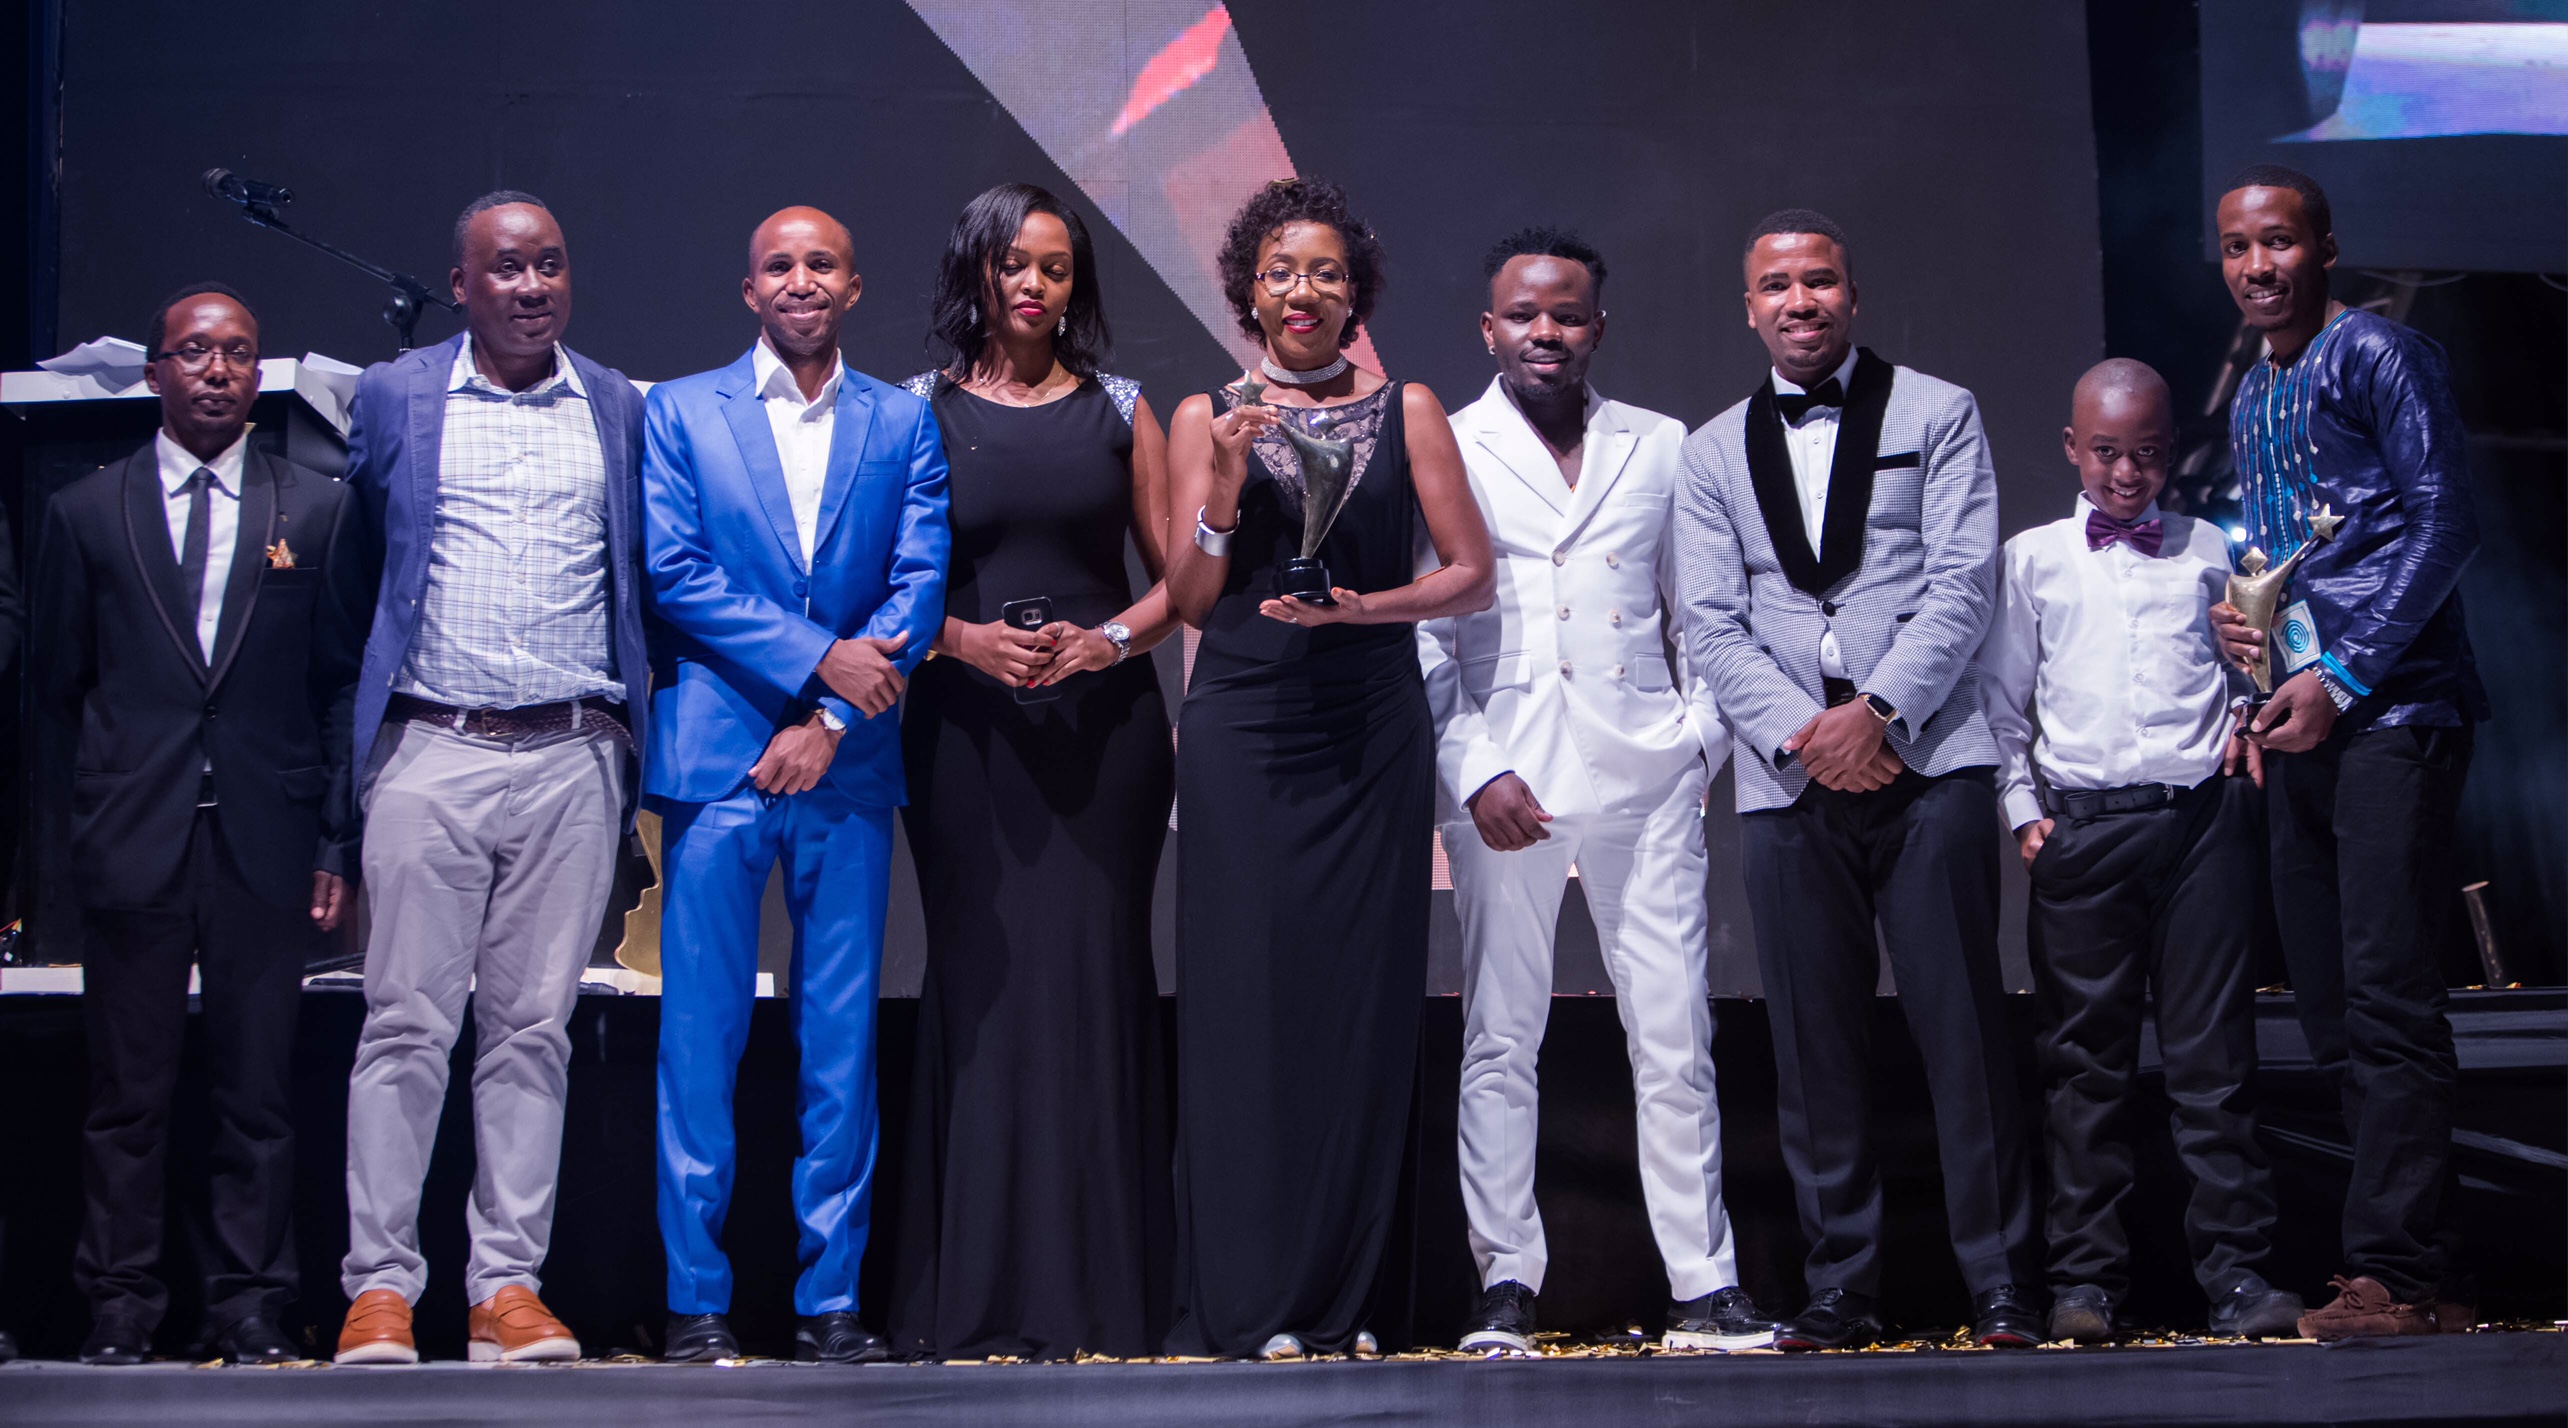 Vodafone Marketing Director, Progress Chisenga (2nd right) holding and representing the overall Young Achiever Award poses for a picture with (left –right) Founder of the Awards Awel Uwihanganye; Social Entrepreneurship Award winner Muhammed Kisirisa aka Slum Ambassador; Fiona Kayitesi, Vodafone Youth Program Manager; Creative Arts-Fashion Award winner Brian Ahumuza of Abryanz Collection; and Humphrey Nabimanya, the Team Leader & Founder of Reach A Hand Uganda at the prestigious 2017 Young Achievers Awards recently.